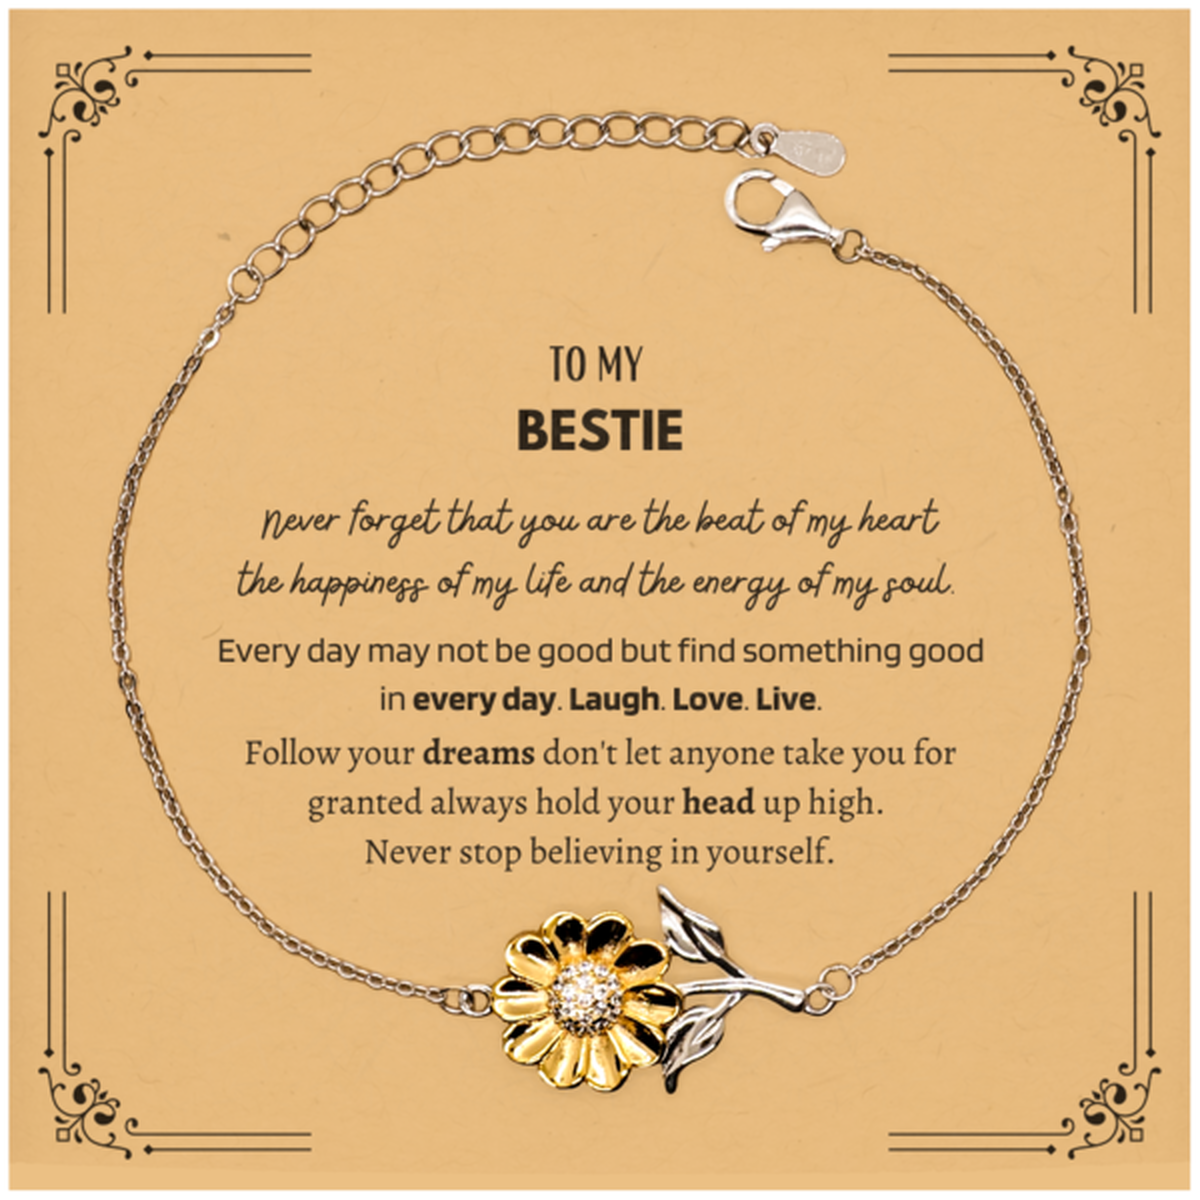 To My Bestie Message Card Gifts, Christmas Bestie Sunflower Bracelet Present, Birthday Unique Motivational For Bestie, To My Bestie Never forget that you are the beat of my heart the happiness of my life and the energy of my soul